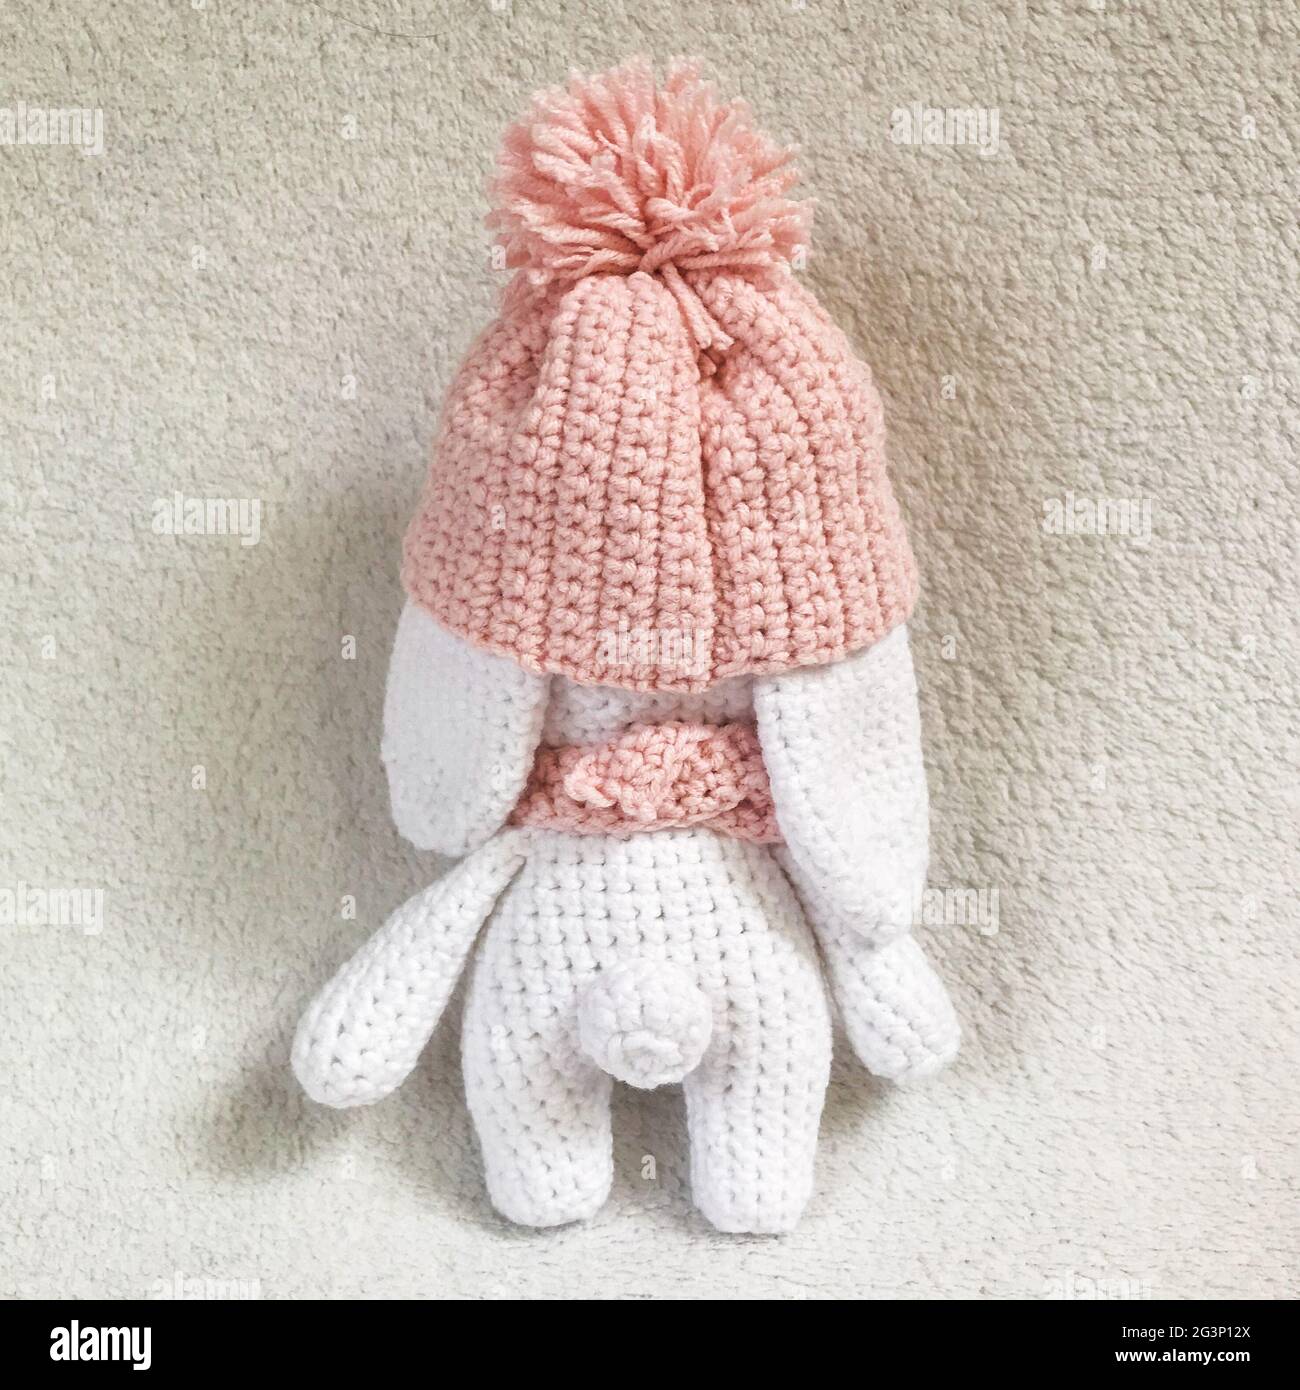 Handmade Crochet Animal Toy - Amigurumi Stuffed Toy - Cute Bunny with a Hat and Scarf Stock Photo